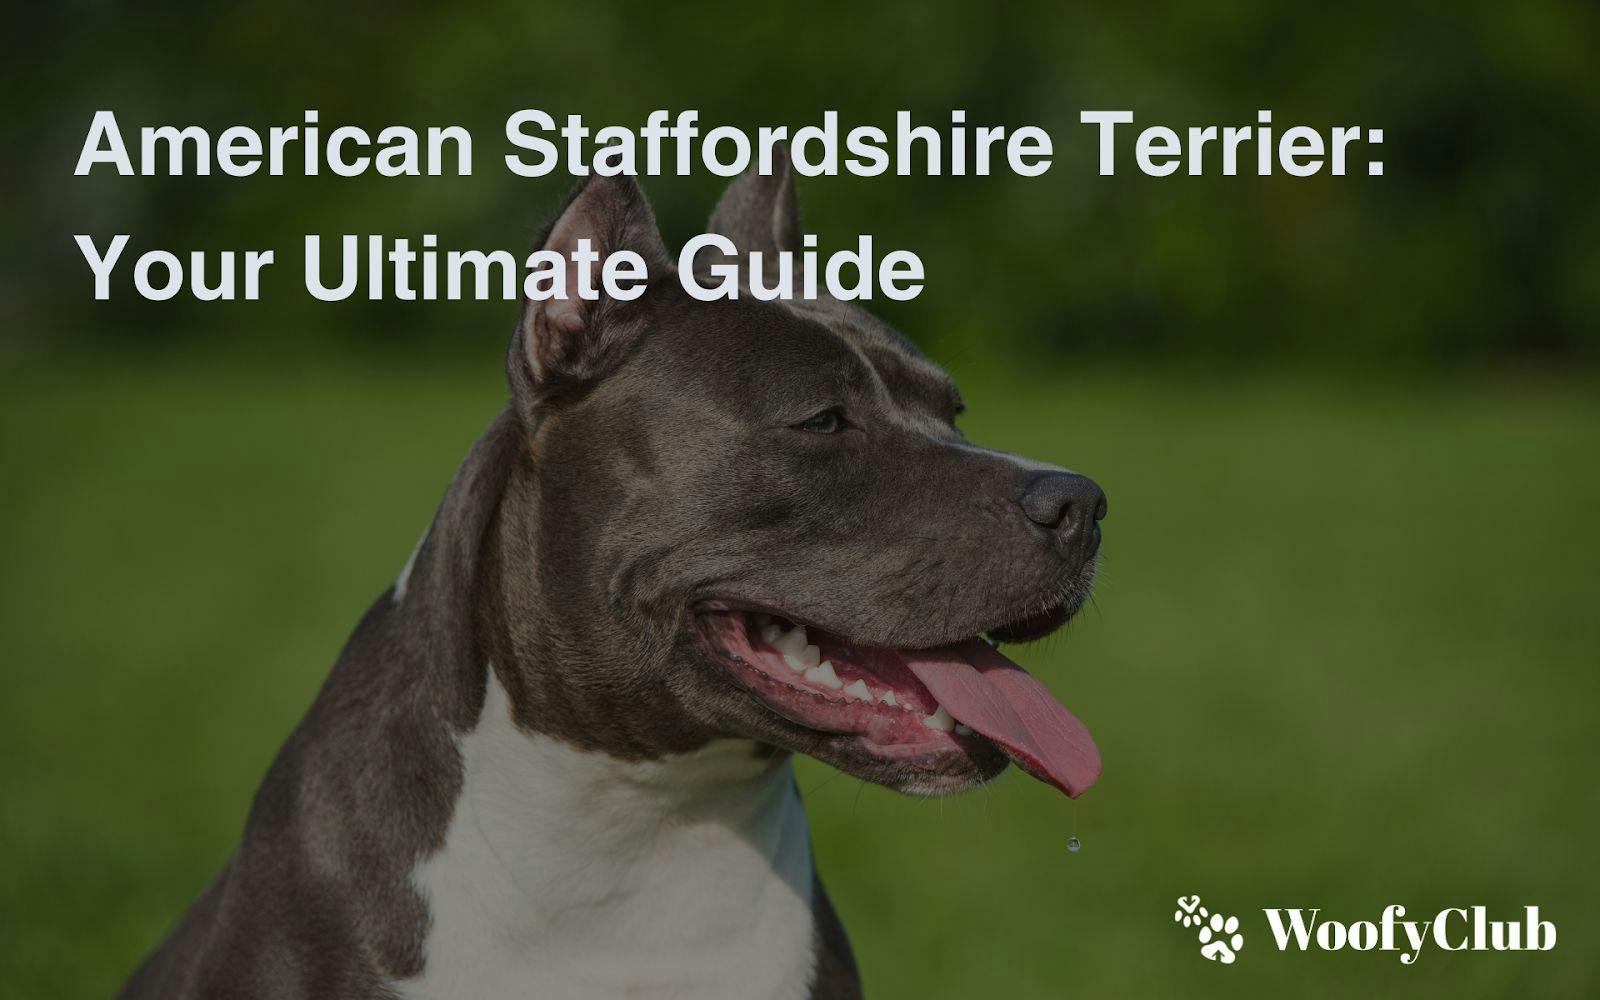 American Staffordshire Terrier: Your Ultimate Guide